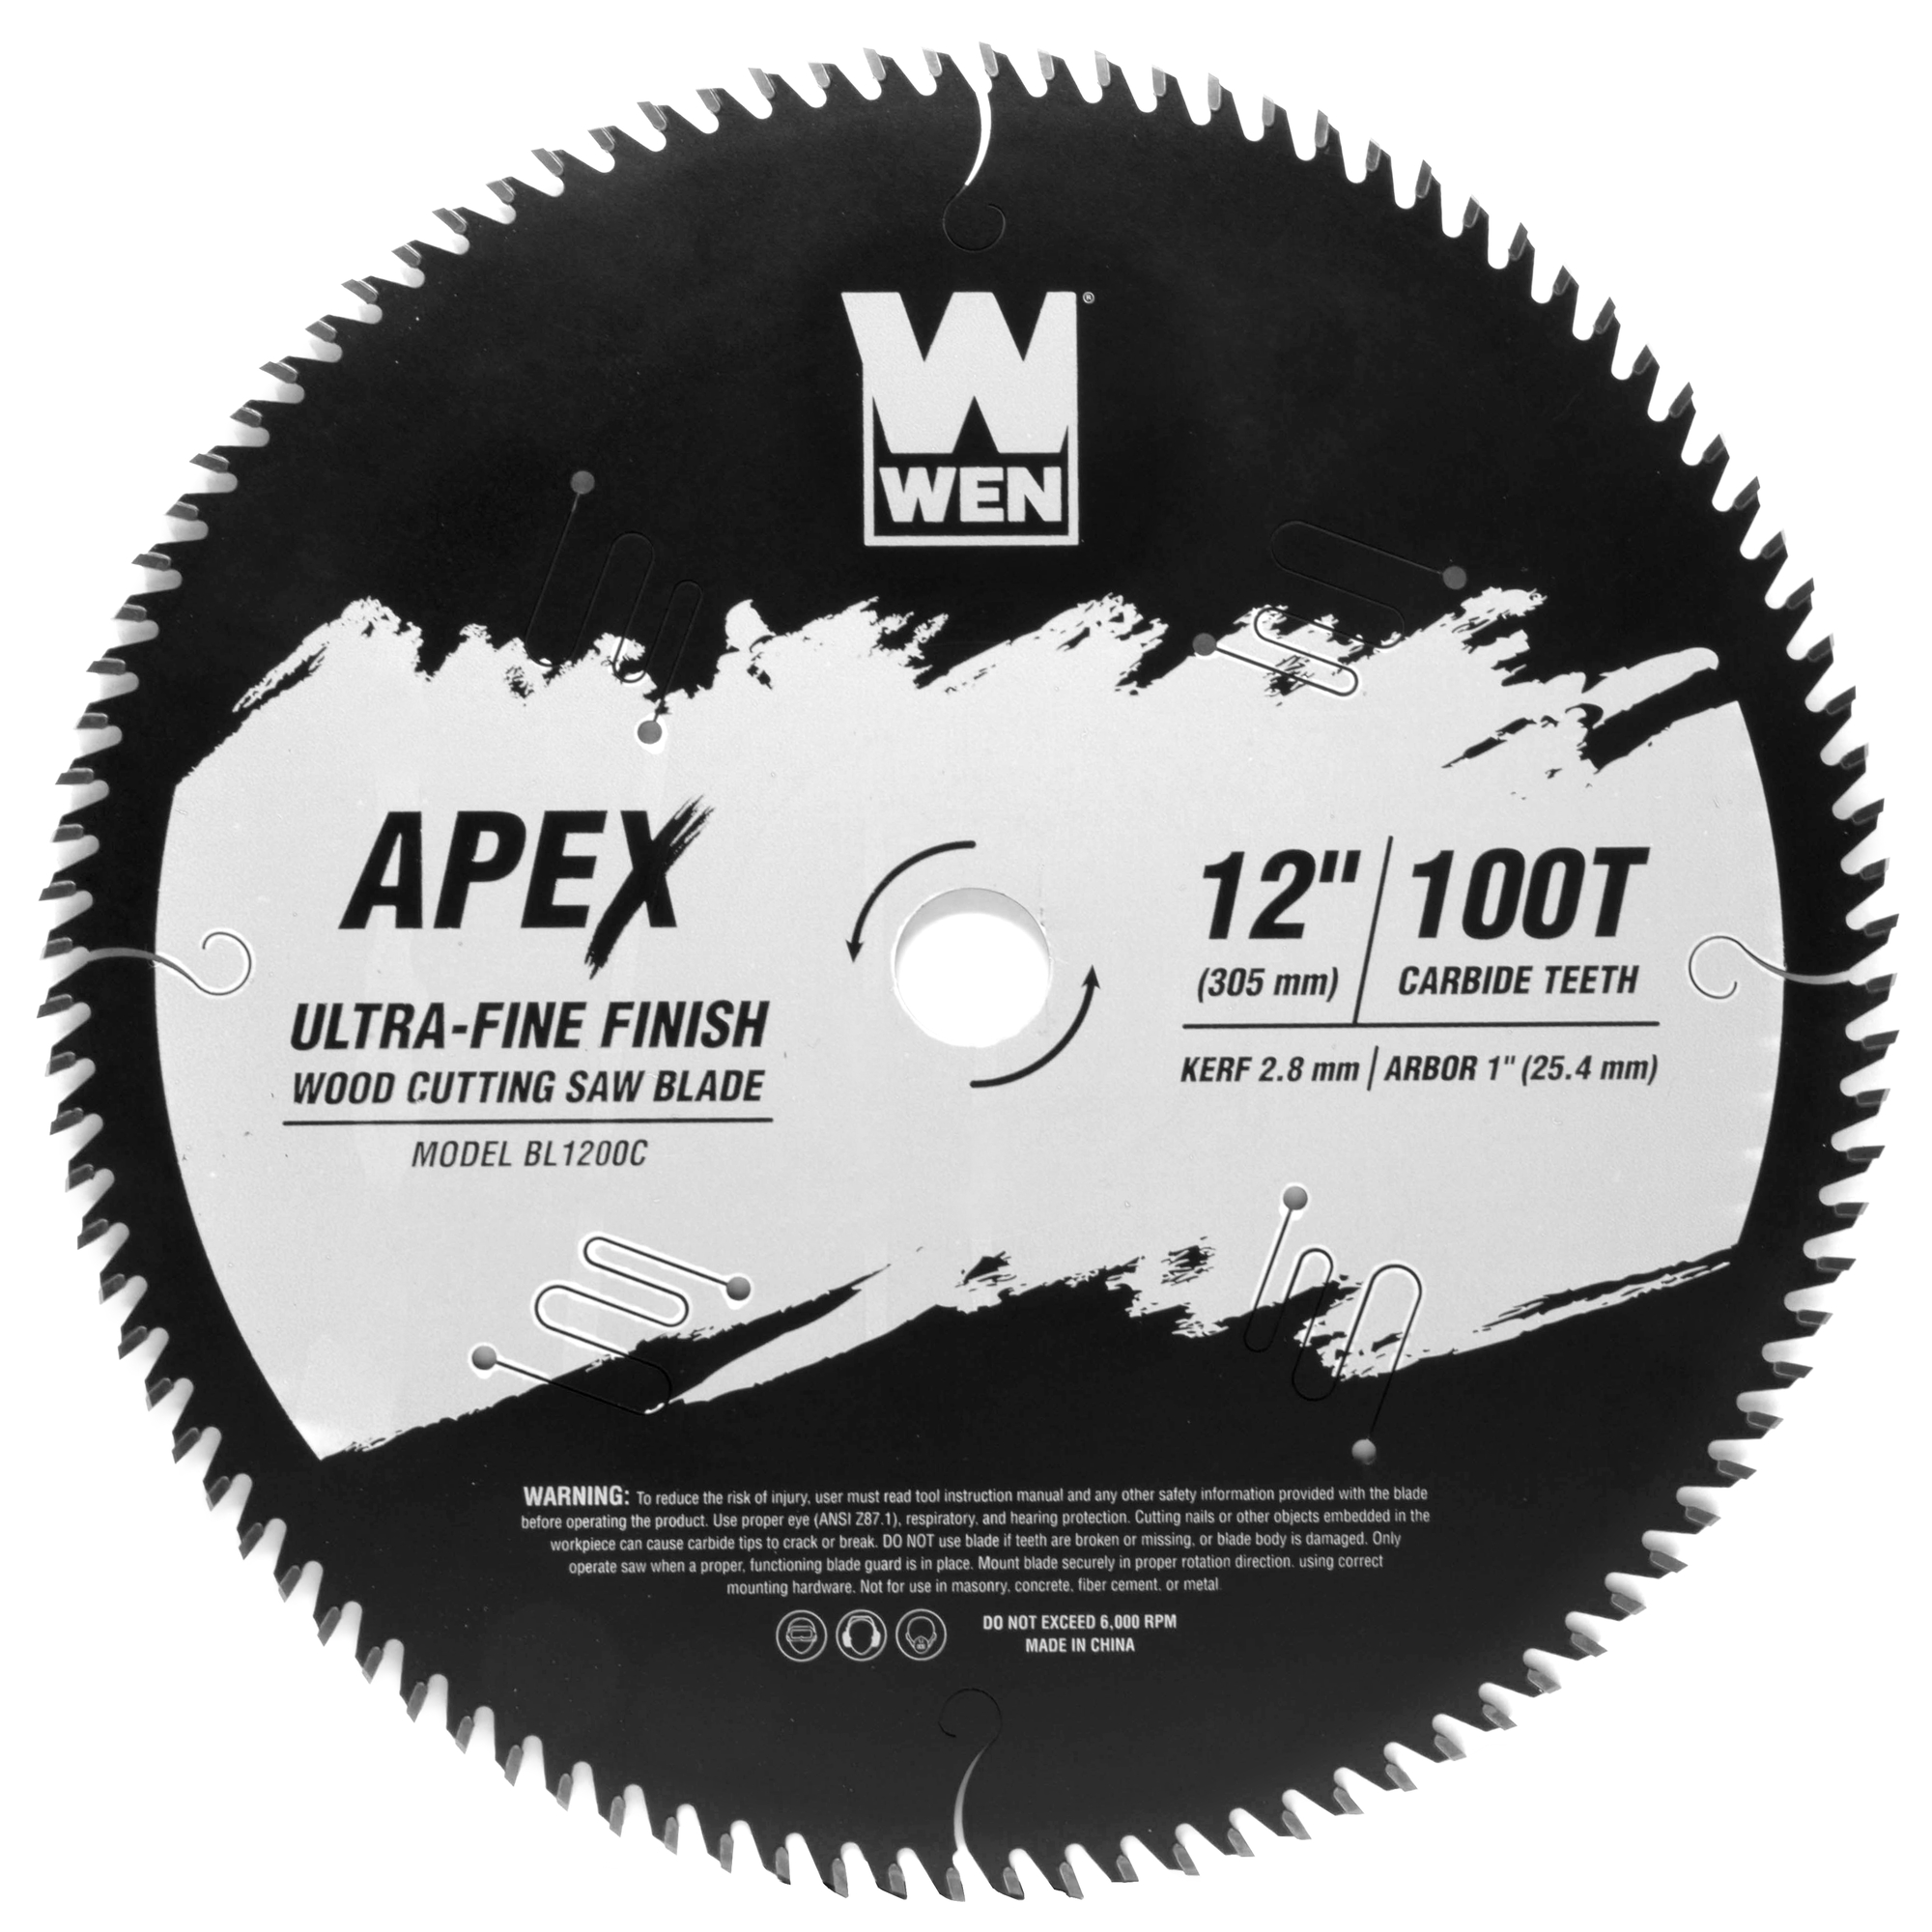 WEN, Apex 12Inch 100T Carbide-Tipped Woodworking Saw Blade, Blade Diameter 12 in, Included (qty.) 1, Model BL1200C